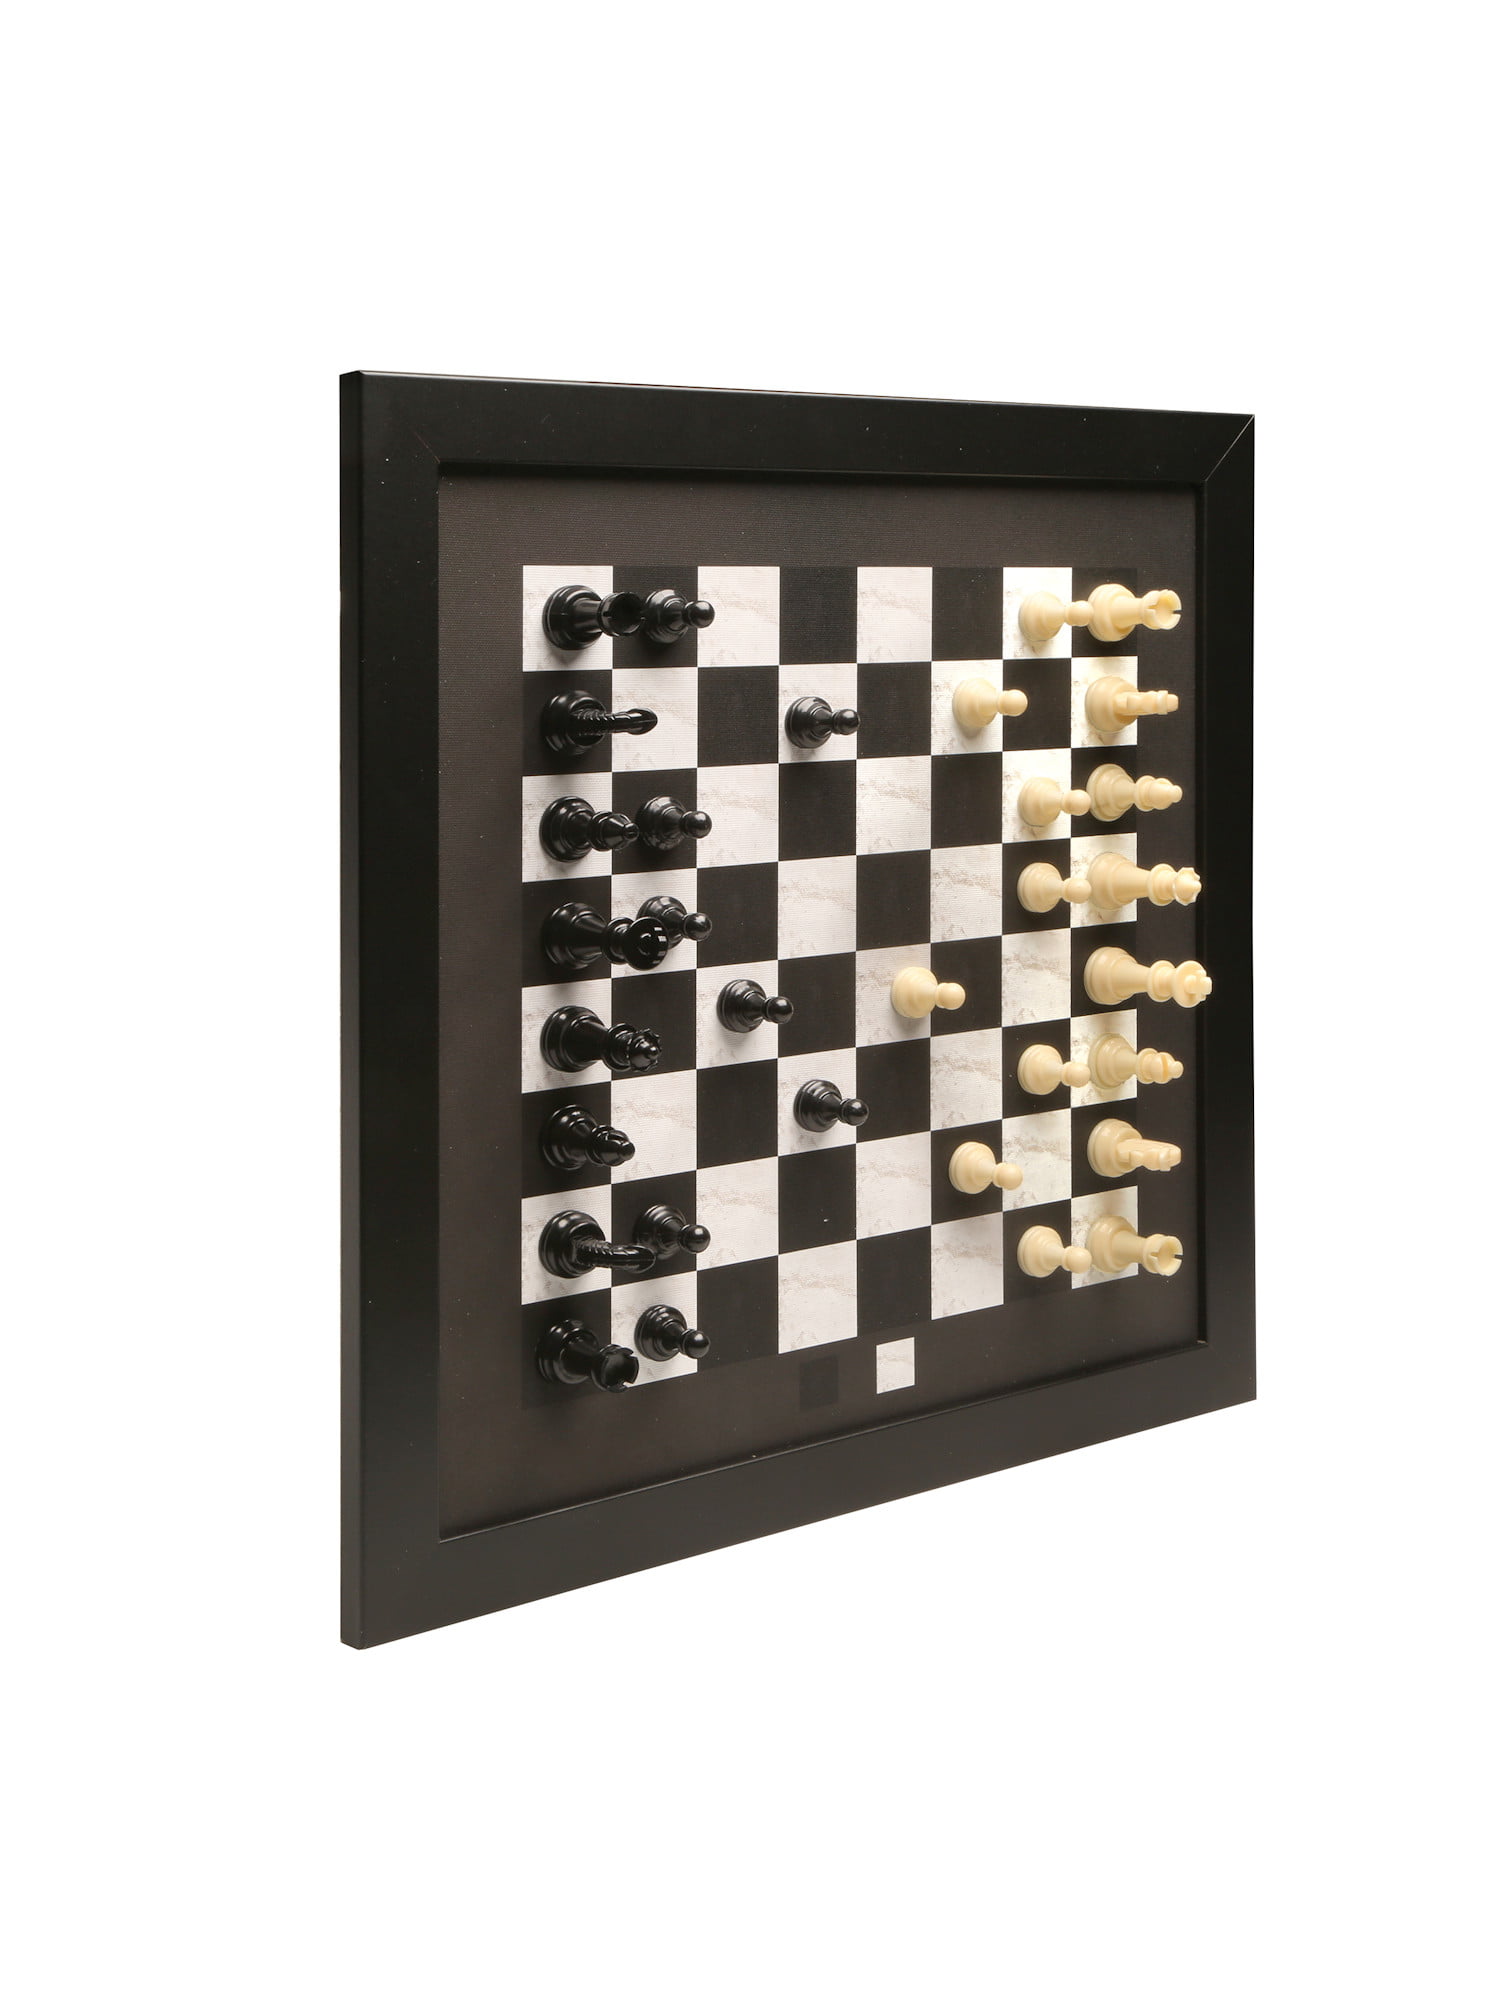 Winding Hills Design Magnetic Wall Chess Set, Framed Chess Board